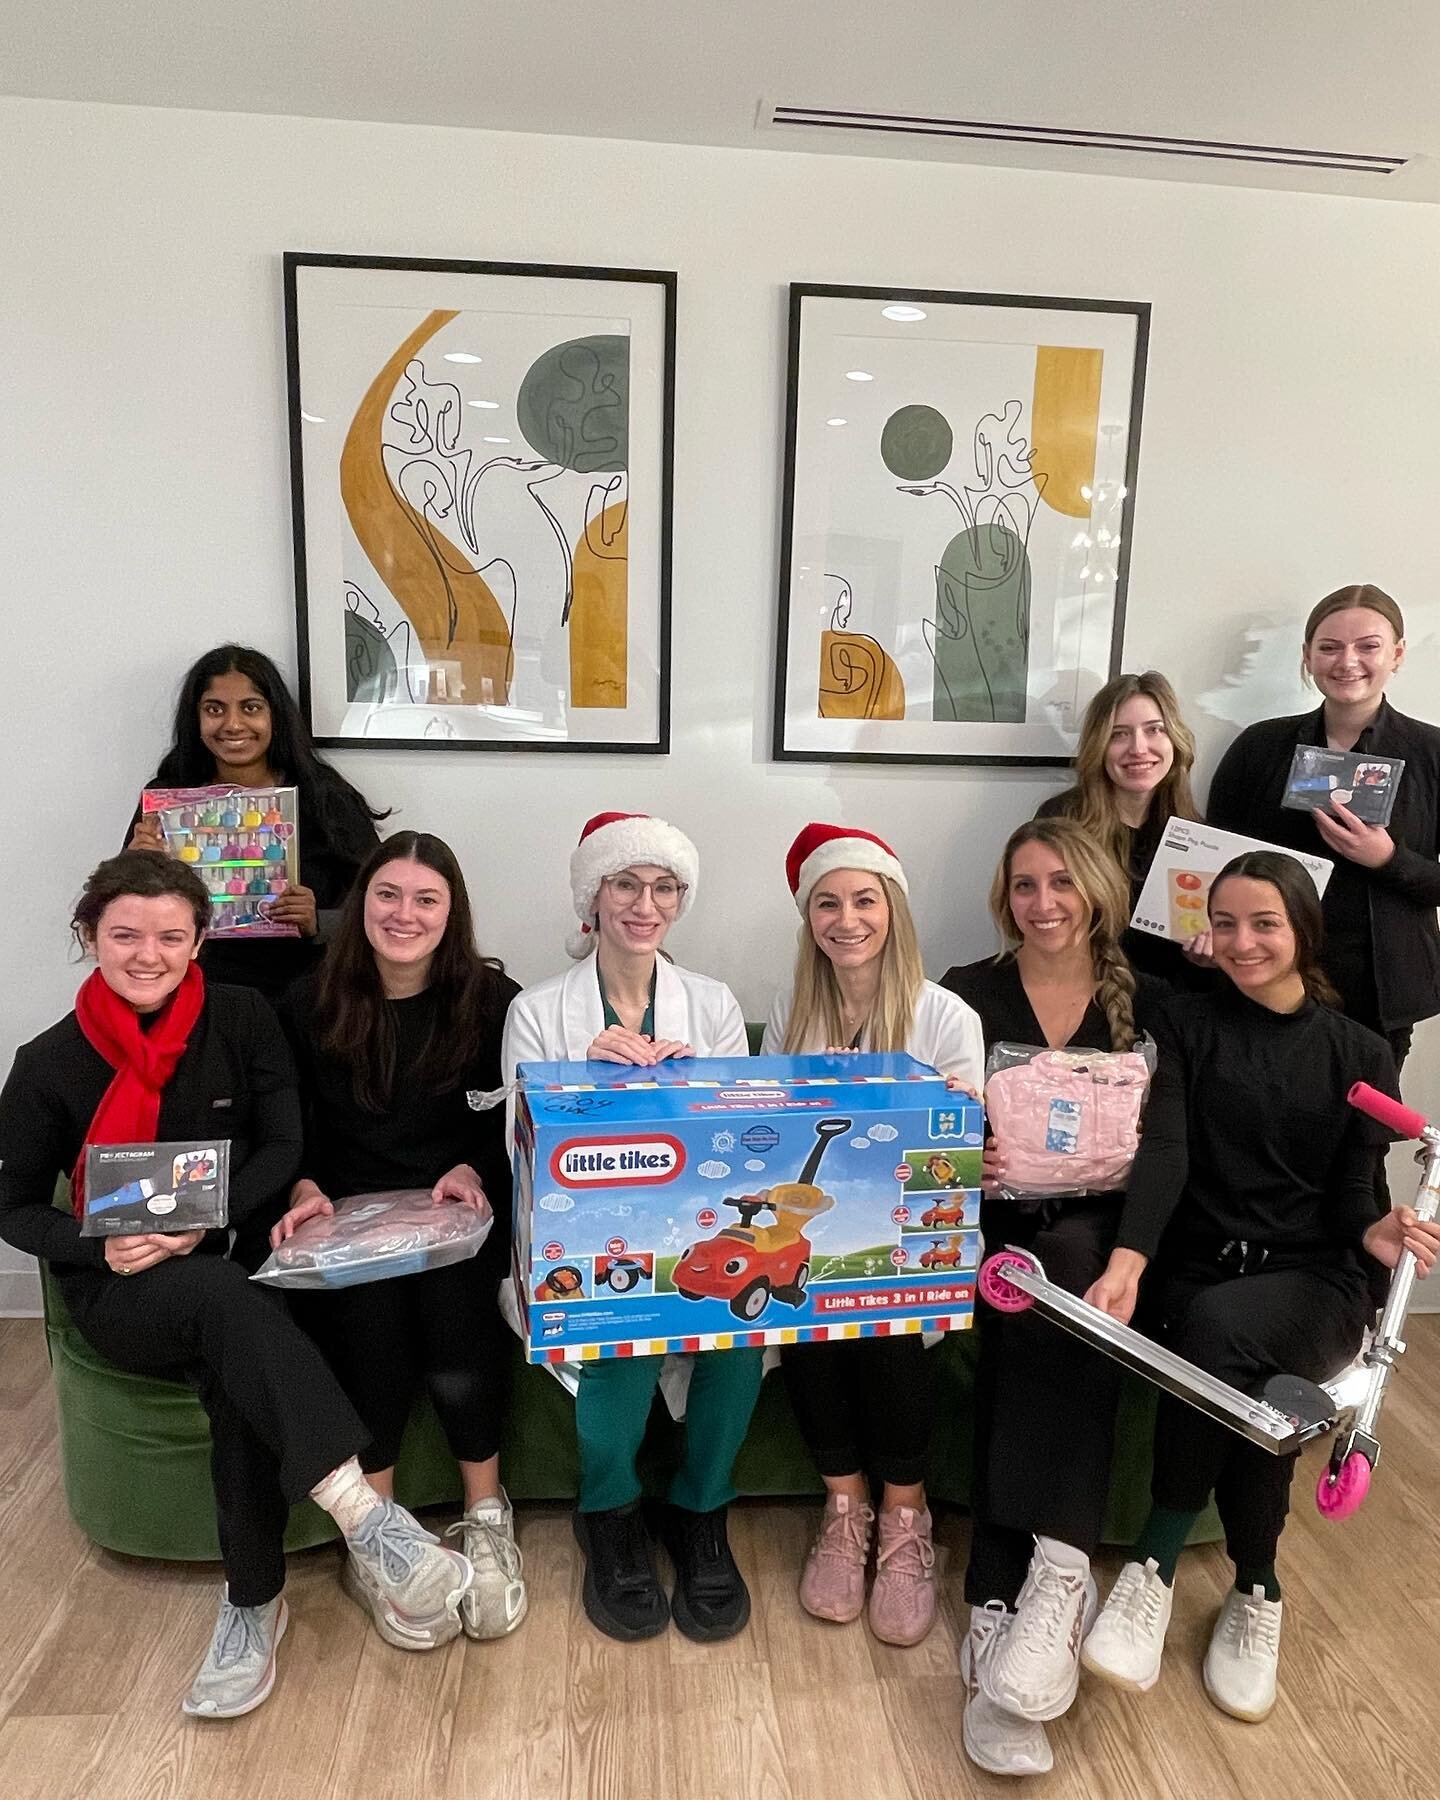 Happy Holidays to the entire Virginia Square Dermatology community. This season we supported Angel Tree (via The Salvation Army) and hope to brighten the spirit of a few children in the DMV area. Wishing you and yours a festive holiday season.